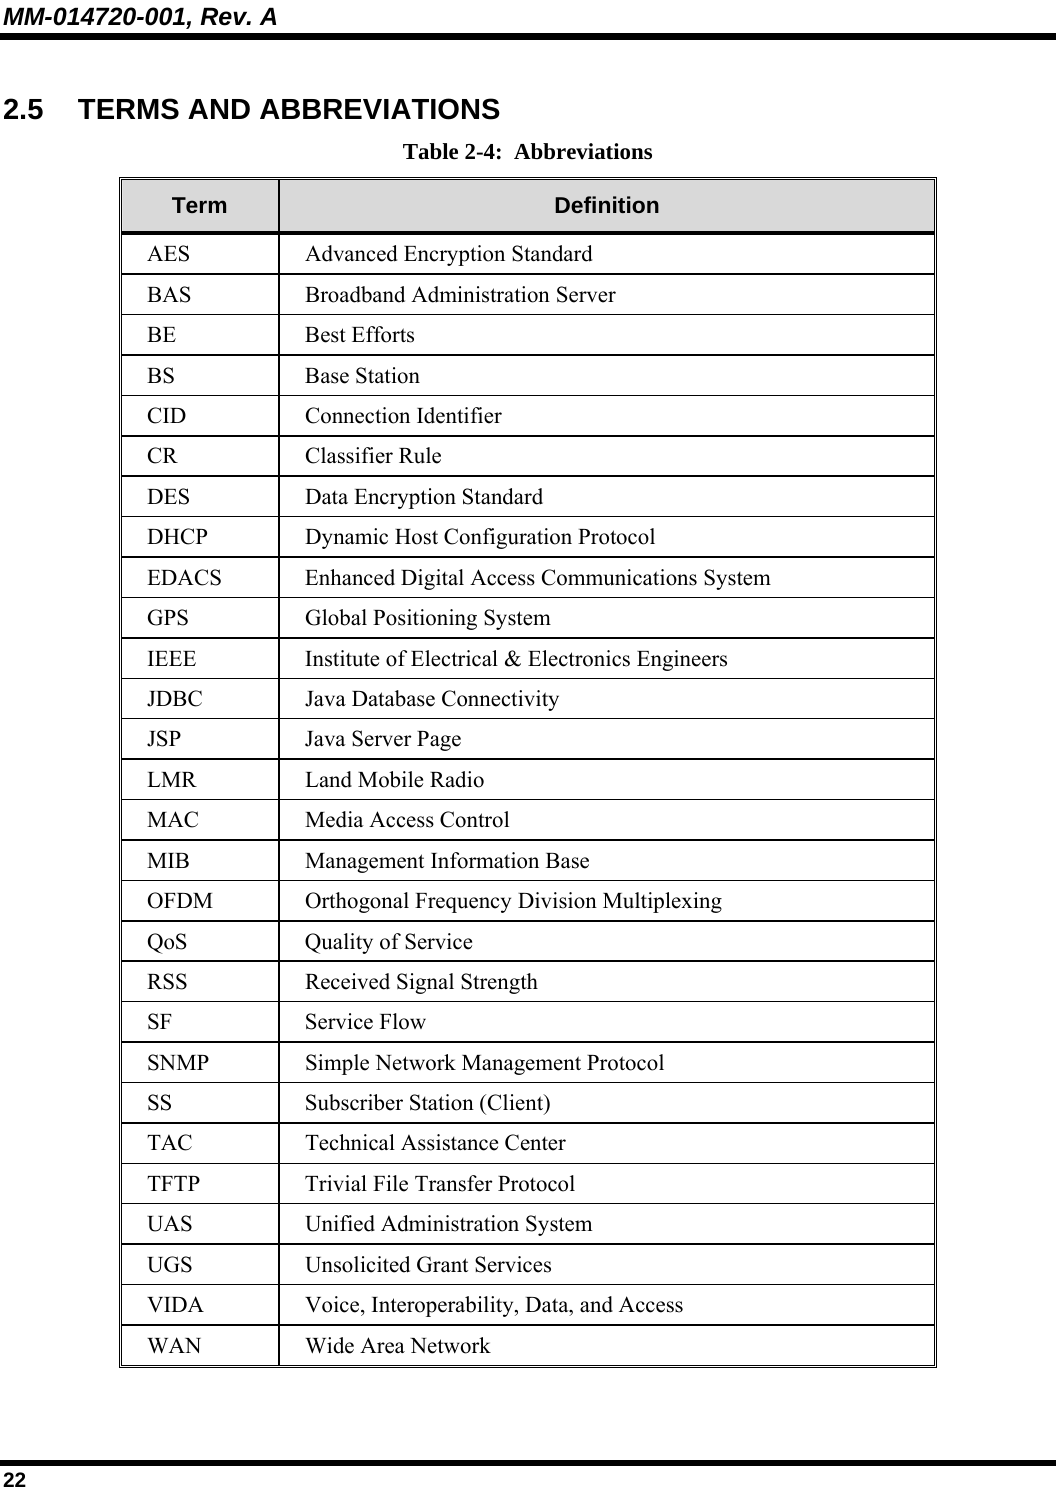 MM-014720-001, Rev. A 22 2.5 TERMS AND ABBREVIATIONS Table 2-4:  Abbreviations Term  Definition AES  Advanced Encryption Standard BAS  Broadband Administration Server BE Best Efforts BS Base Station CID Connection Identifier CR Classifier Rule DES  Data Encryption Standard DHCP  Dynamic Host Configuration Protocol EDACS  Enhanced Digital Access Communications System GPS  Global Positioning System IEEE  Institute of Electrical &amp; Electronics Engineers JDBC  Java Database Connectivity JSP  Java Server Page LMR Land Mobile Radio MAC  Media Access Control MIB Management Information Base OFDM  Orthogonal Frequency Division Multiplexing QoS Quality of Service RSS  Received Signal Strength SF Service Flow SNMP Simple Network Management Protocol SS  Subscriber Station (Client) TAC  Technical Assistance Center TFTP  Trivial File Transfer Protocol UAS  Unified Administration System UGS  Unsolicited Grant Services VIDA  Voice, Interoperability, Data, and Access WAN  Wide Area Network 